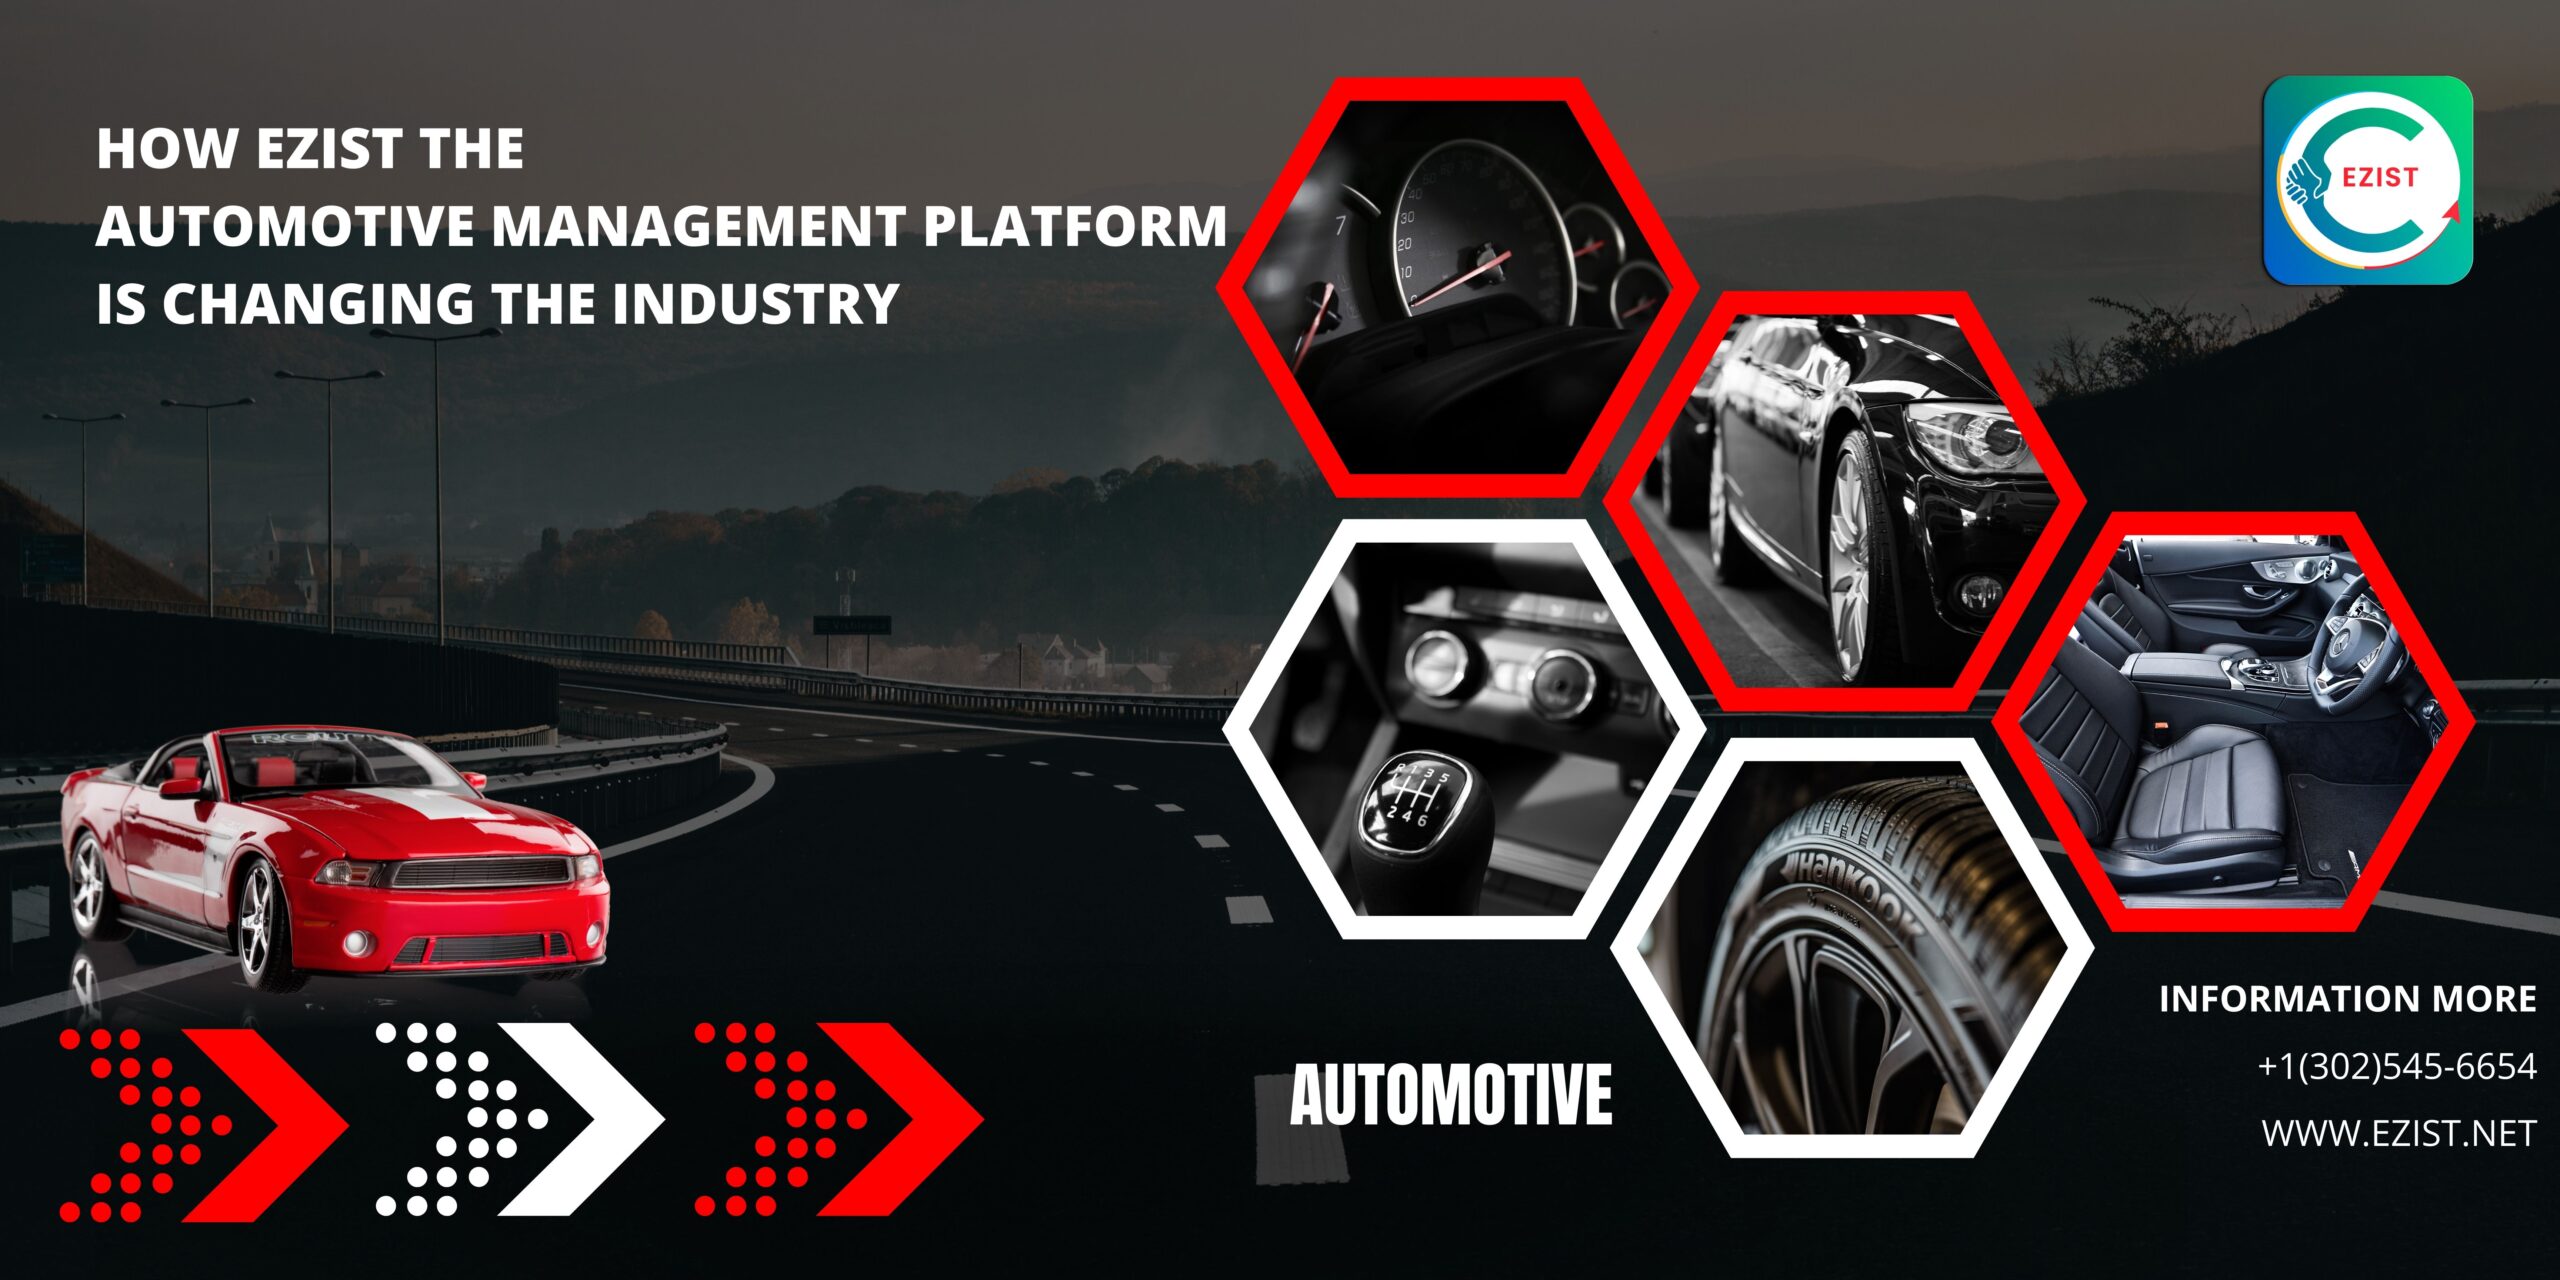 How Ezist the Automotive Management Platform is Changing the Industry